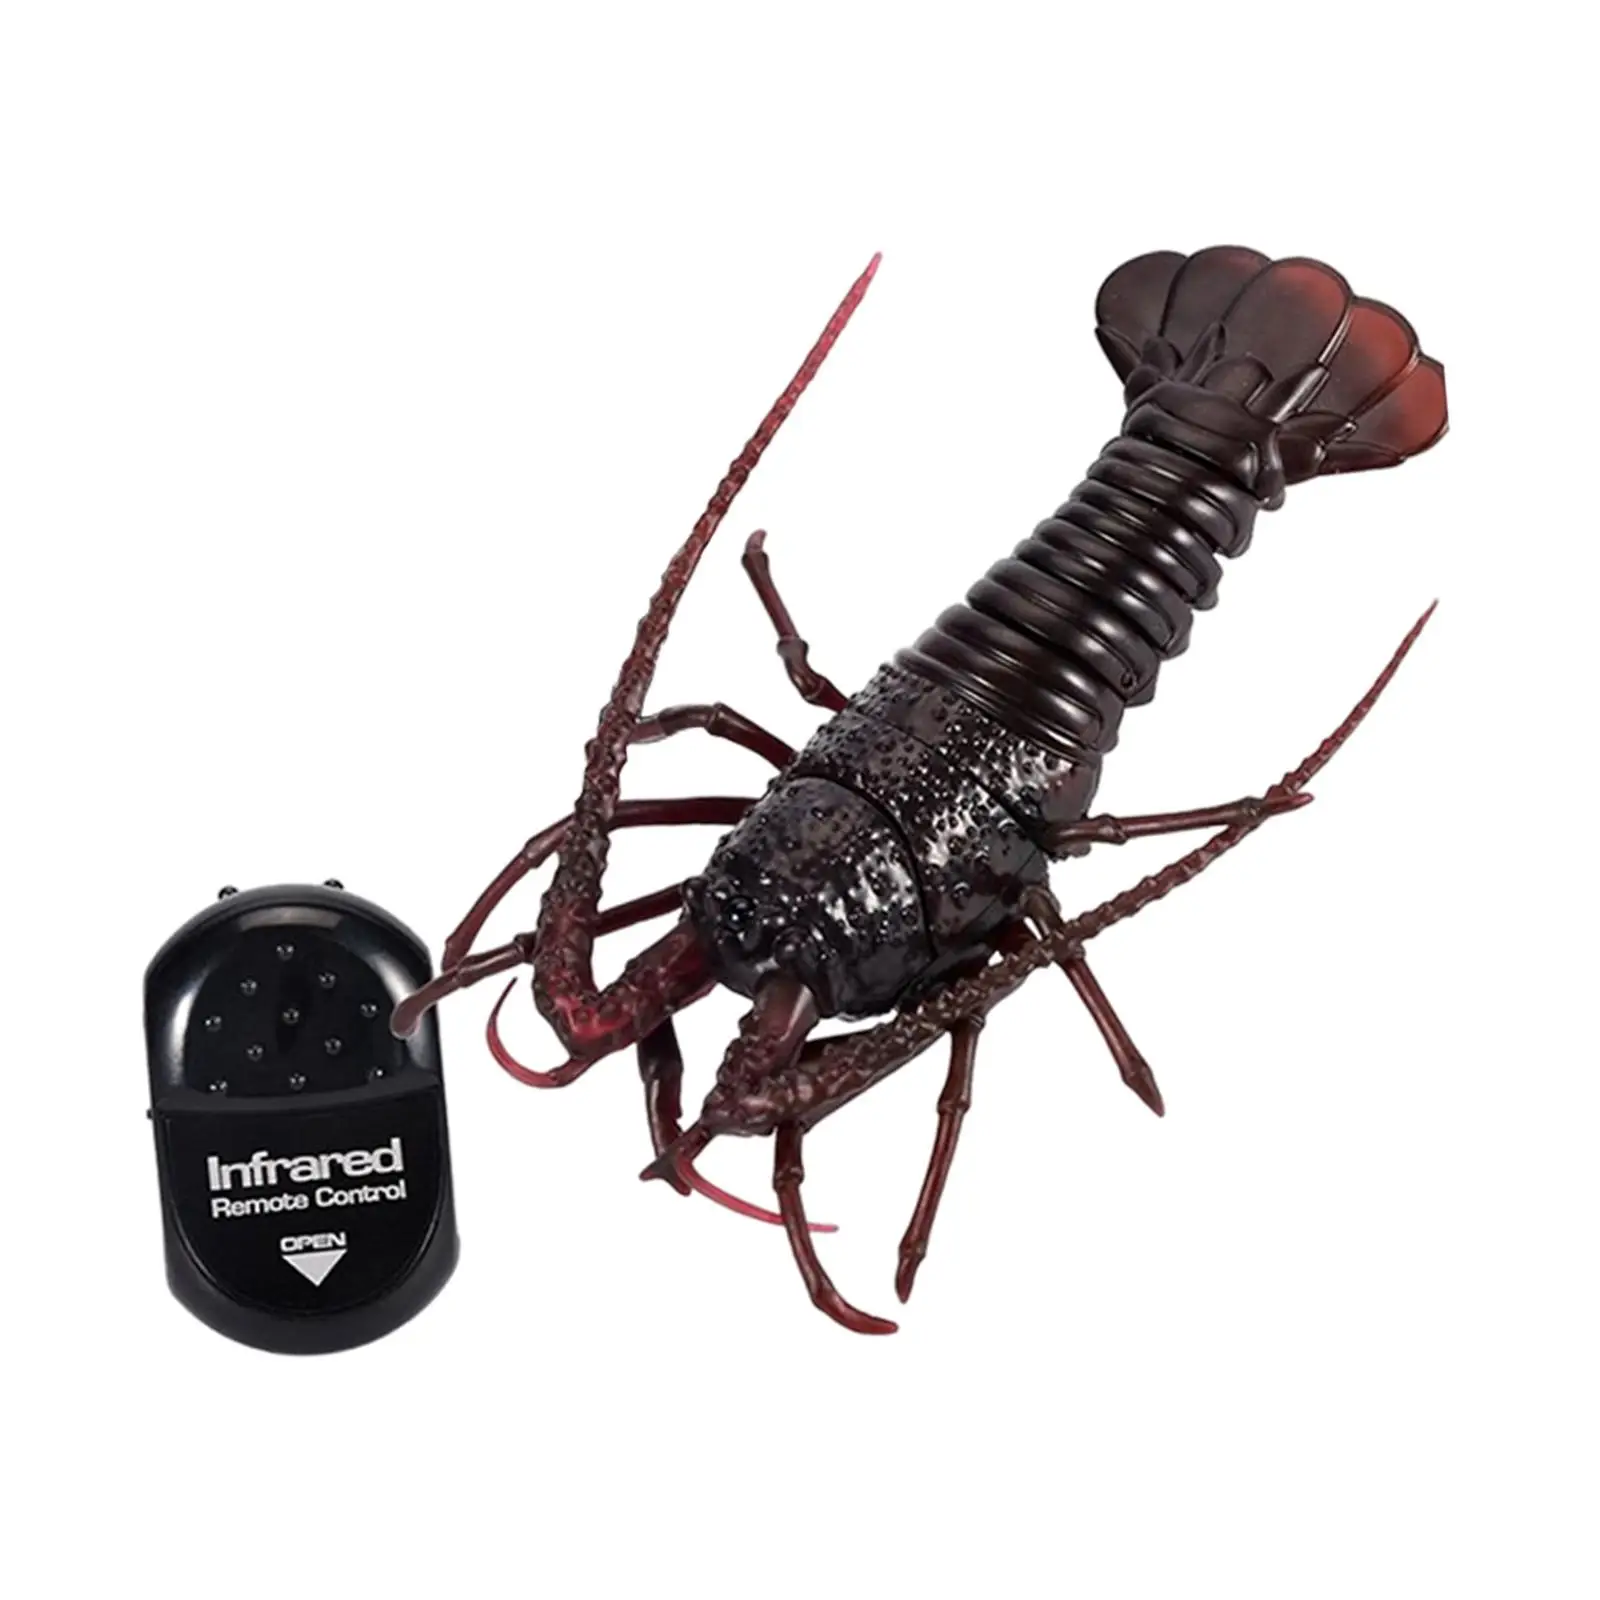 Remote Control Crawfish Toy Vehicle Car for Children Kids Birthday Gifts